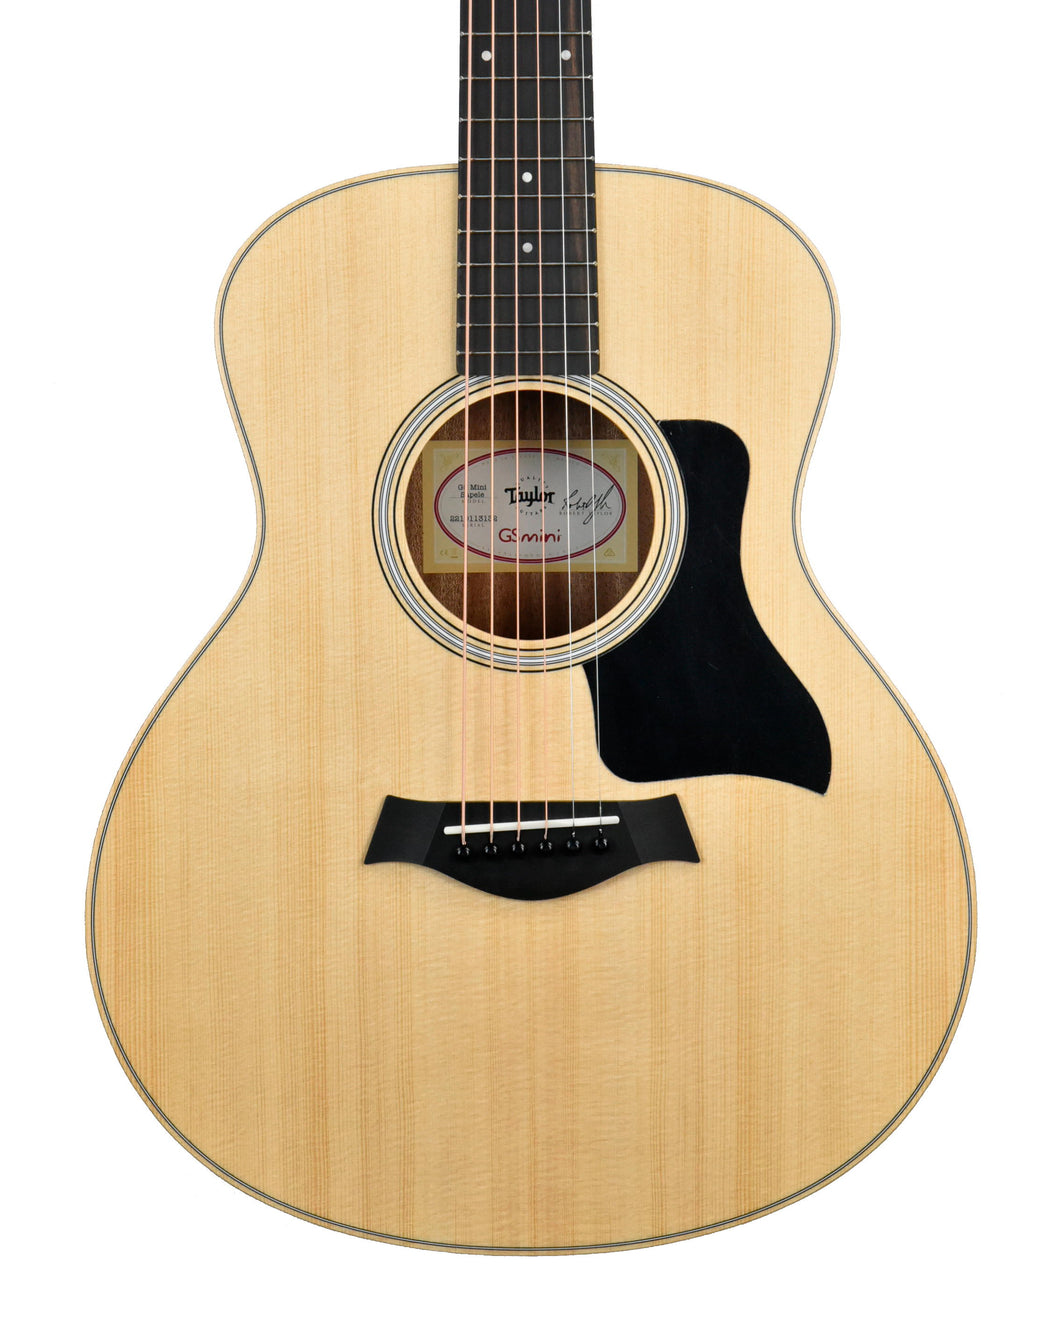 Taylor GS Mini Sapele Acoustic Guitar in Natural 2210113132 - The Music Gallery